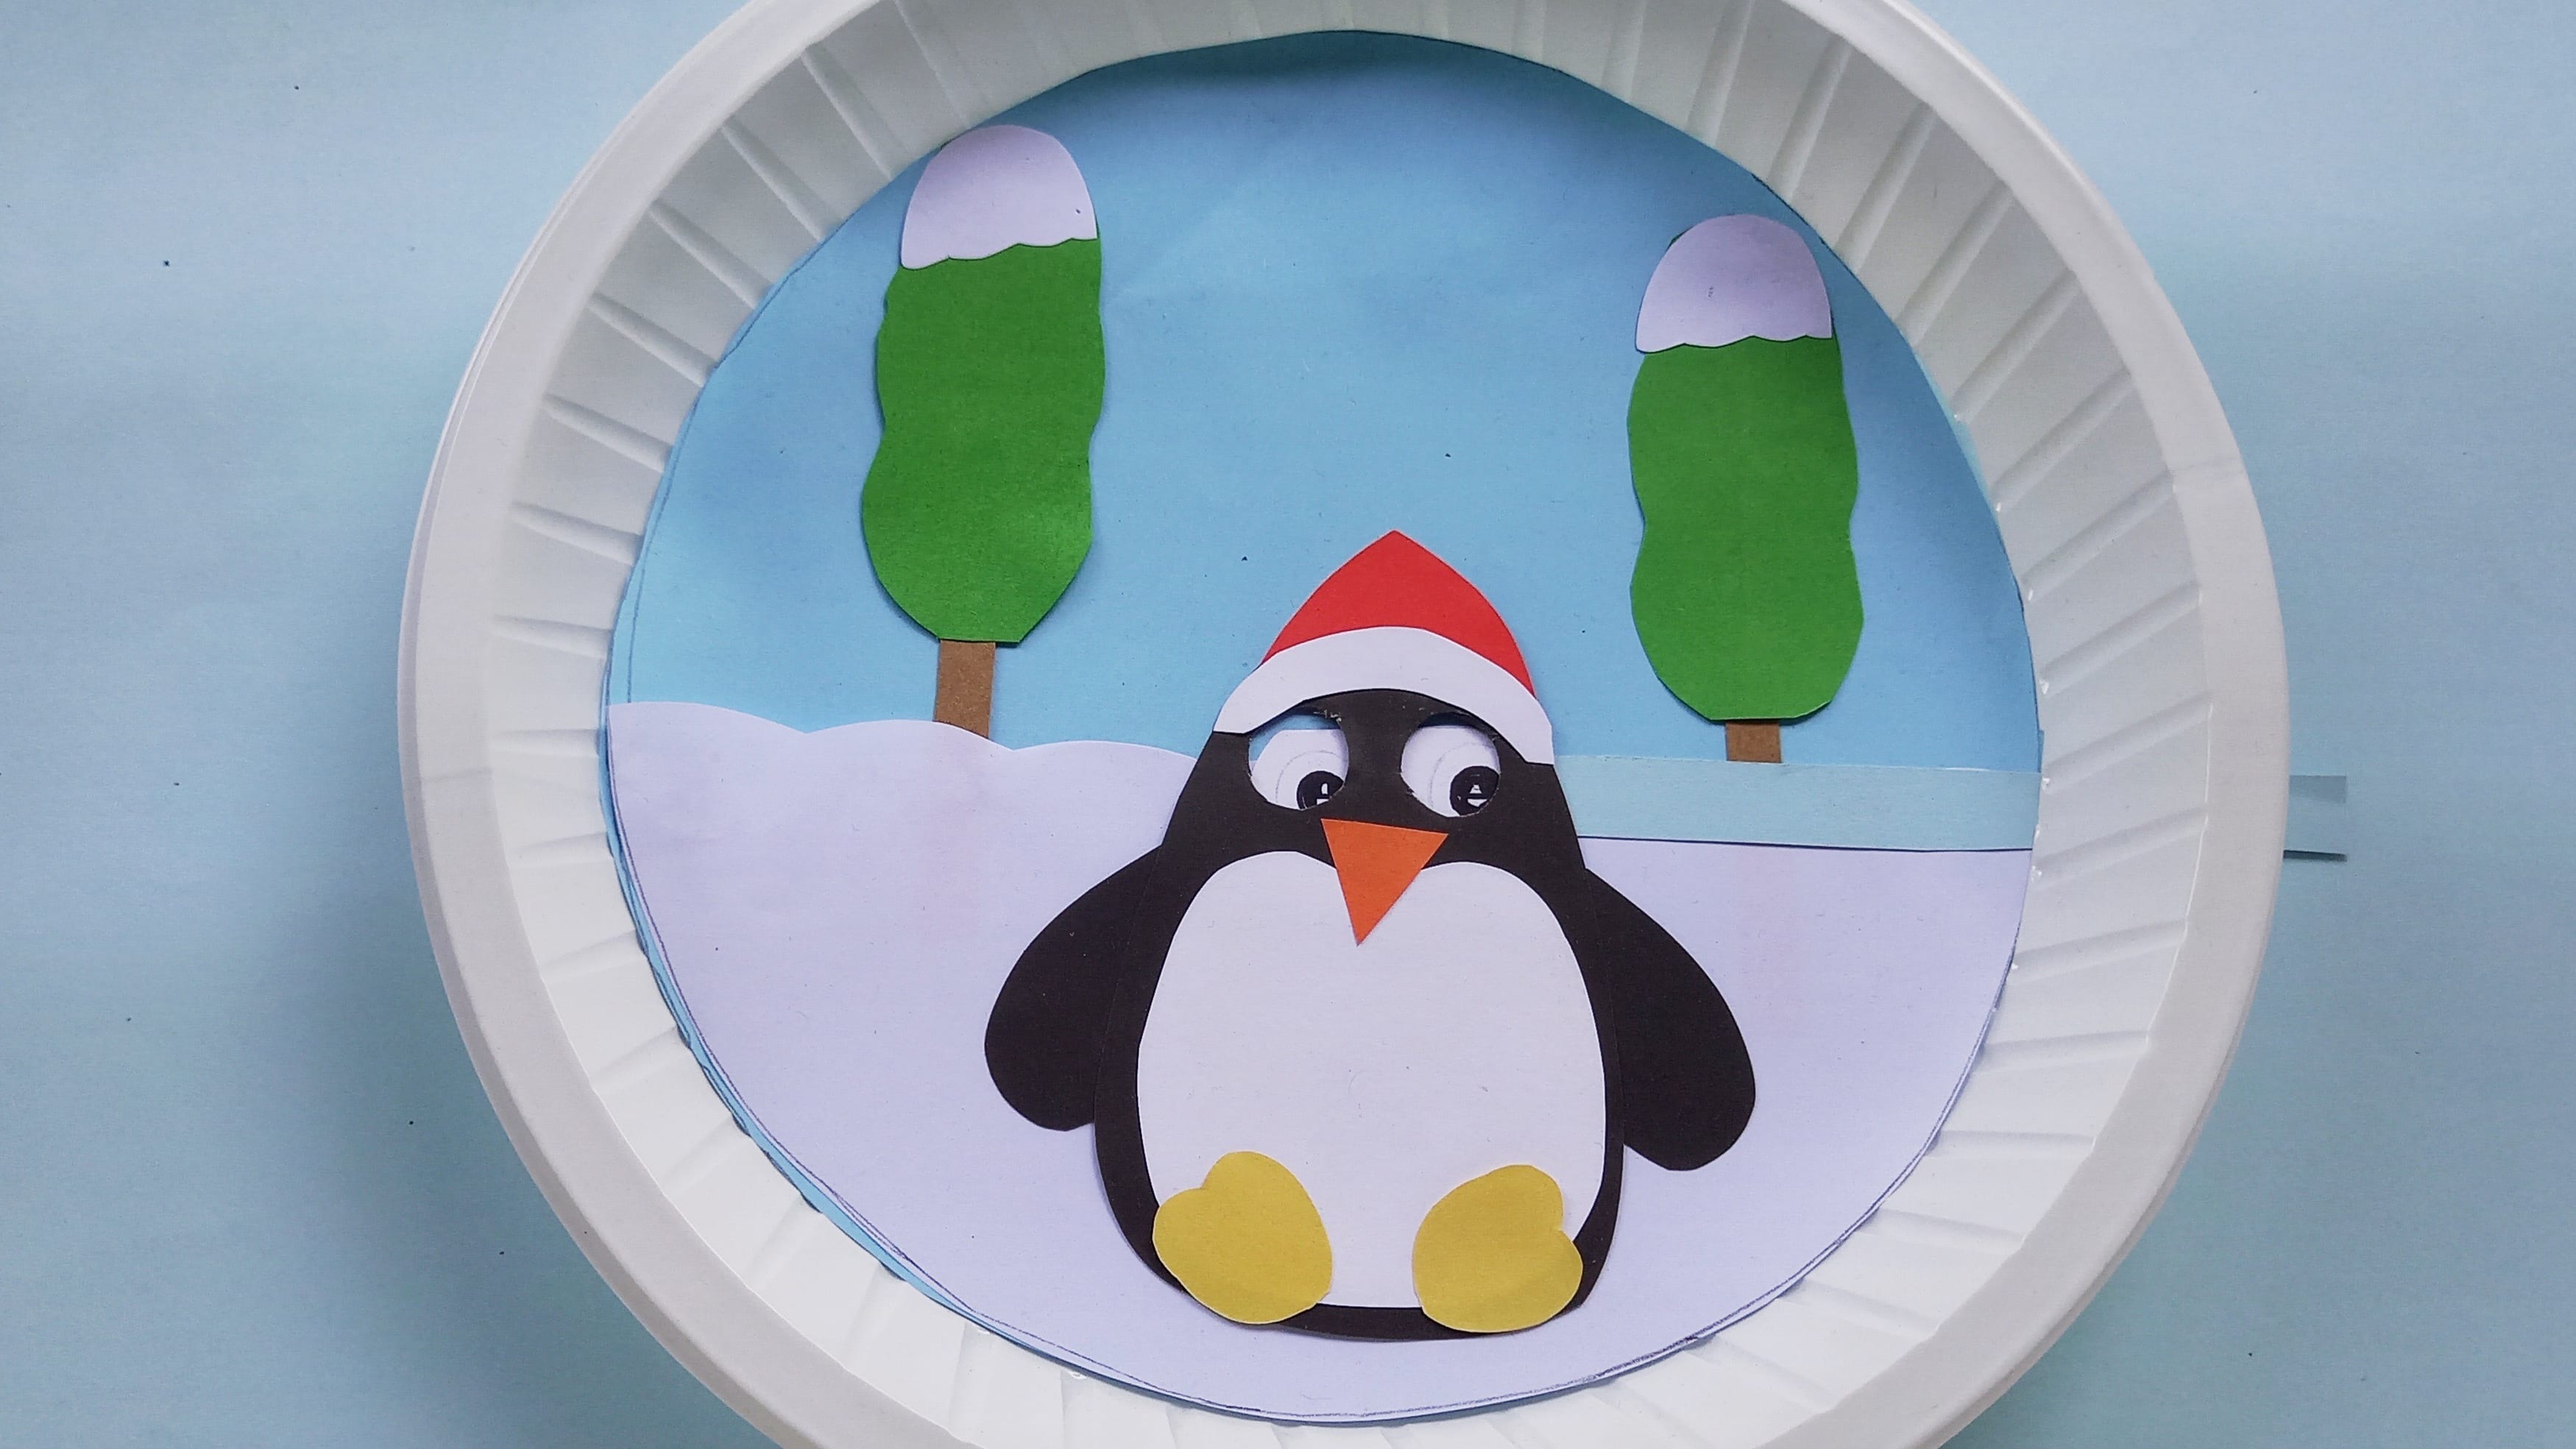 Shop  Crafting Penguin - Crafting Supplies For Kids and Parents